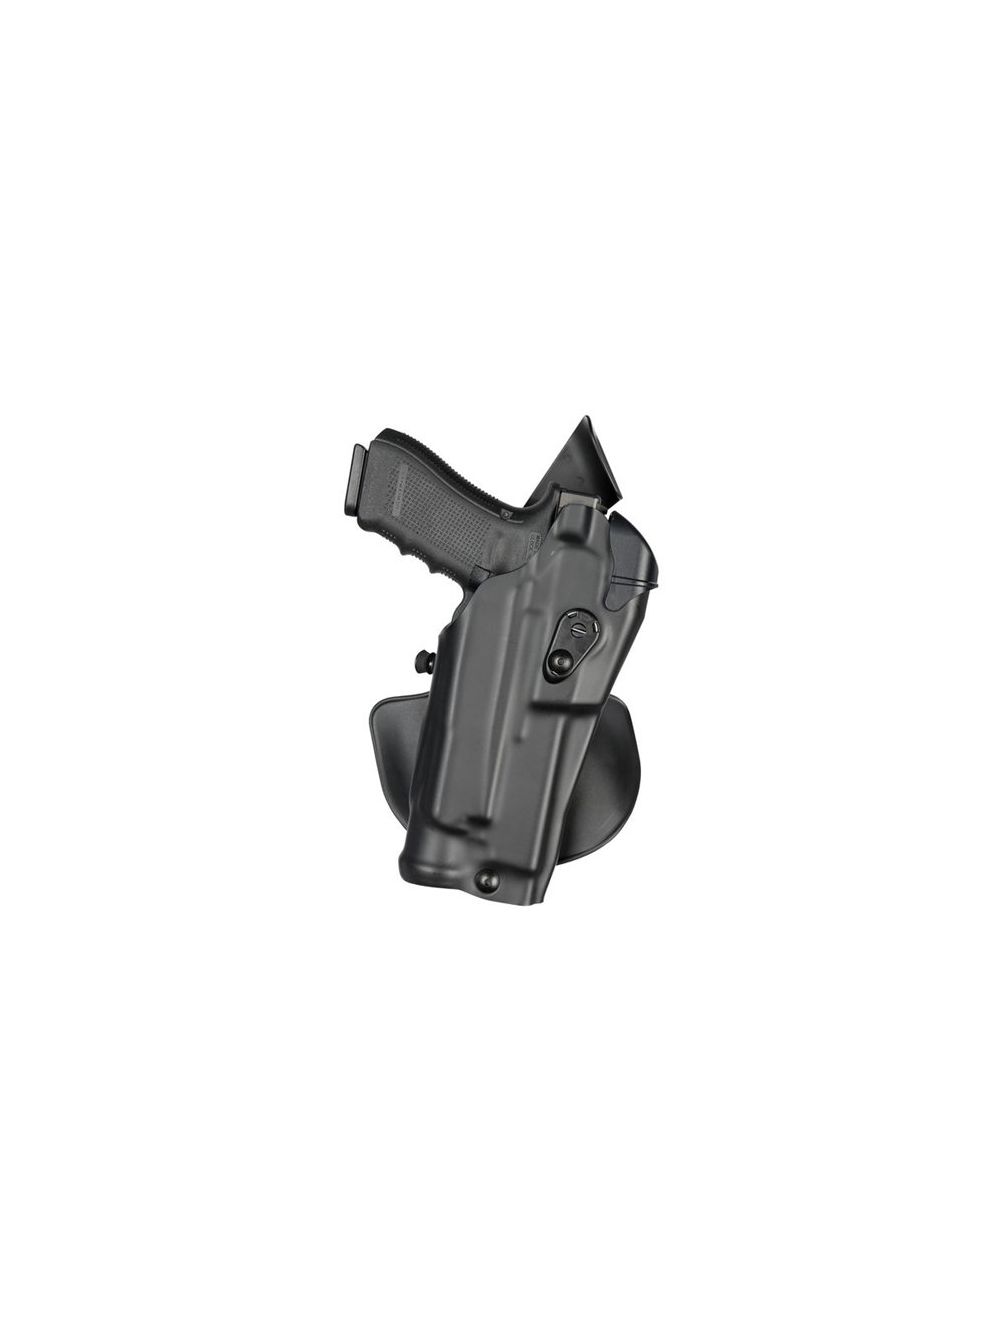 Model 6378RDS ALS Concealment Paddle Holster for Glock 19 MOS w/ Light